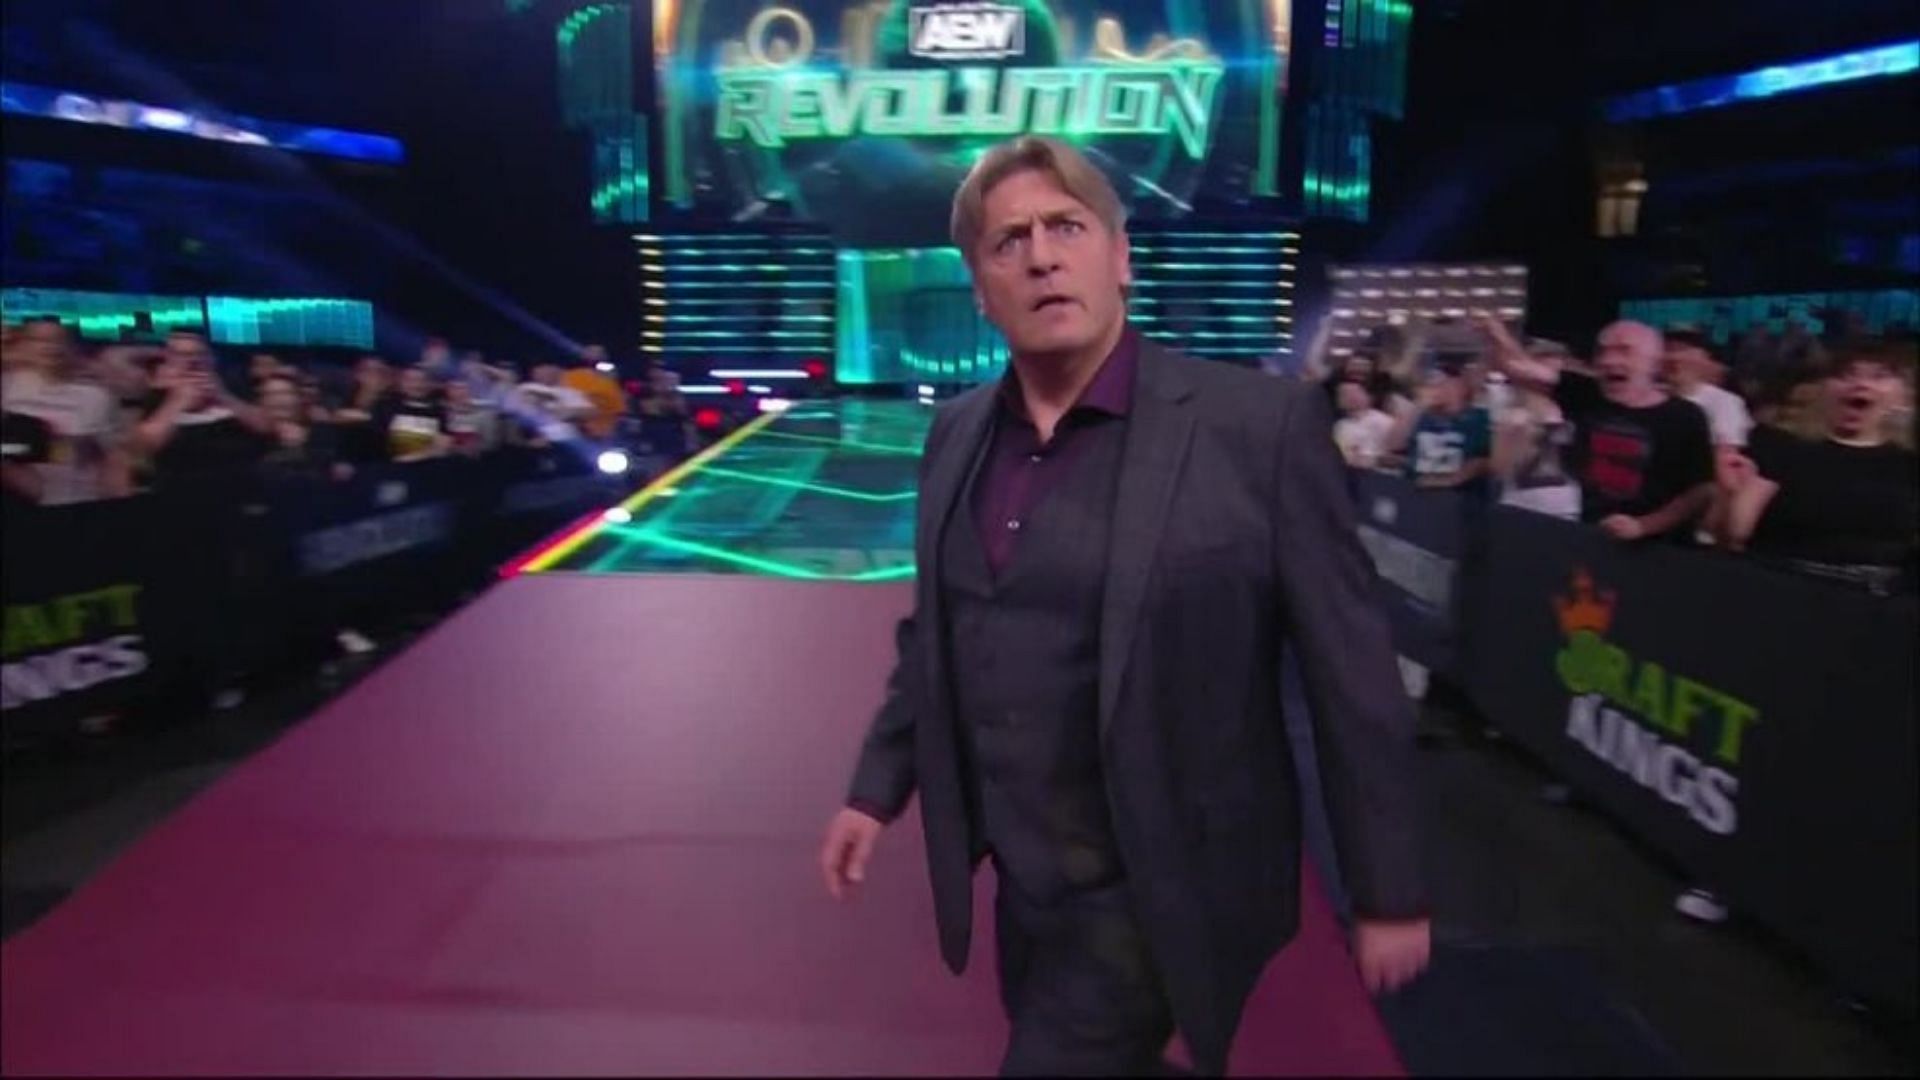 William Regal made his debut at Revolution to slap sense into two AEW stars